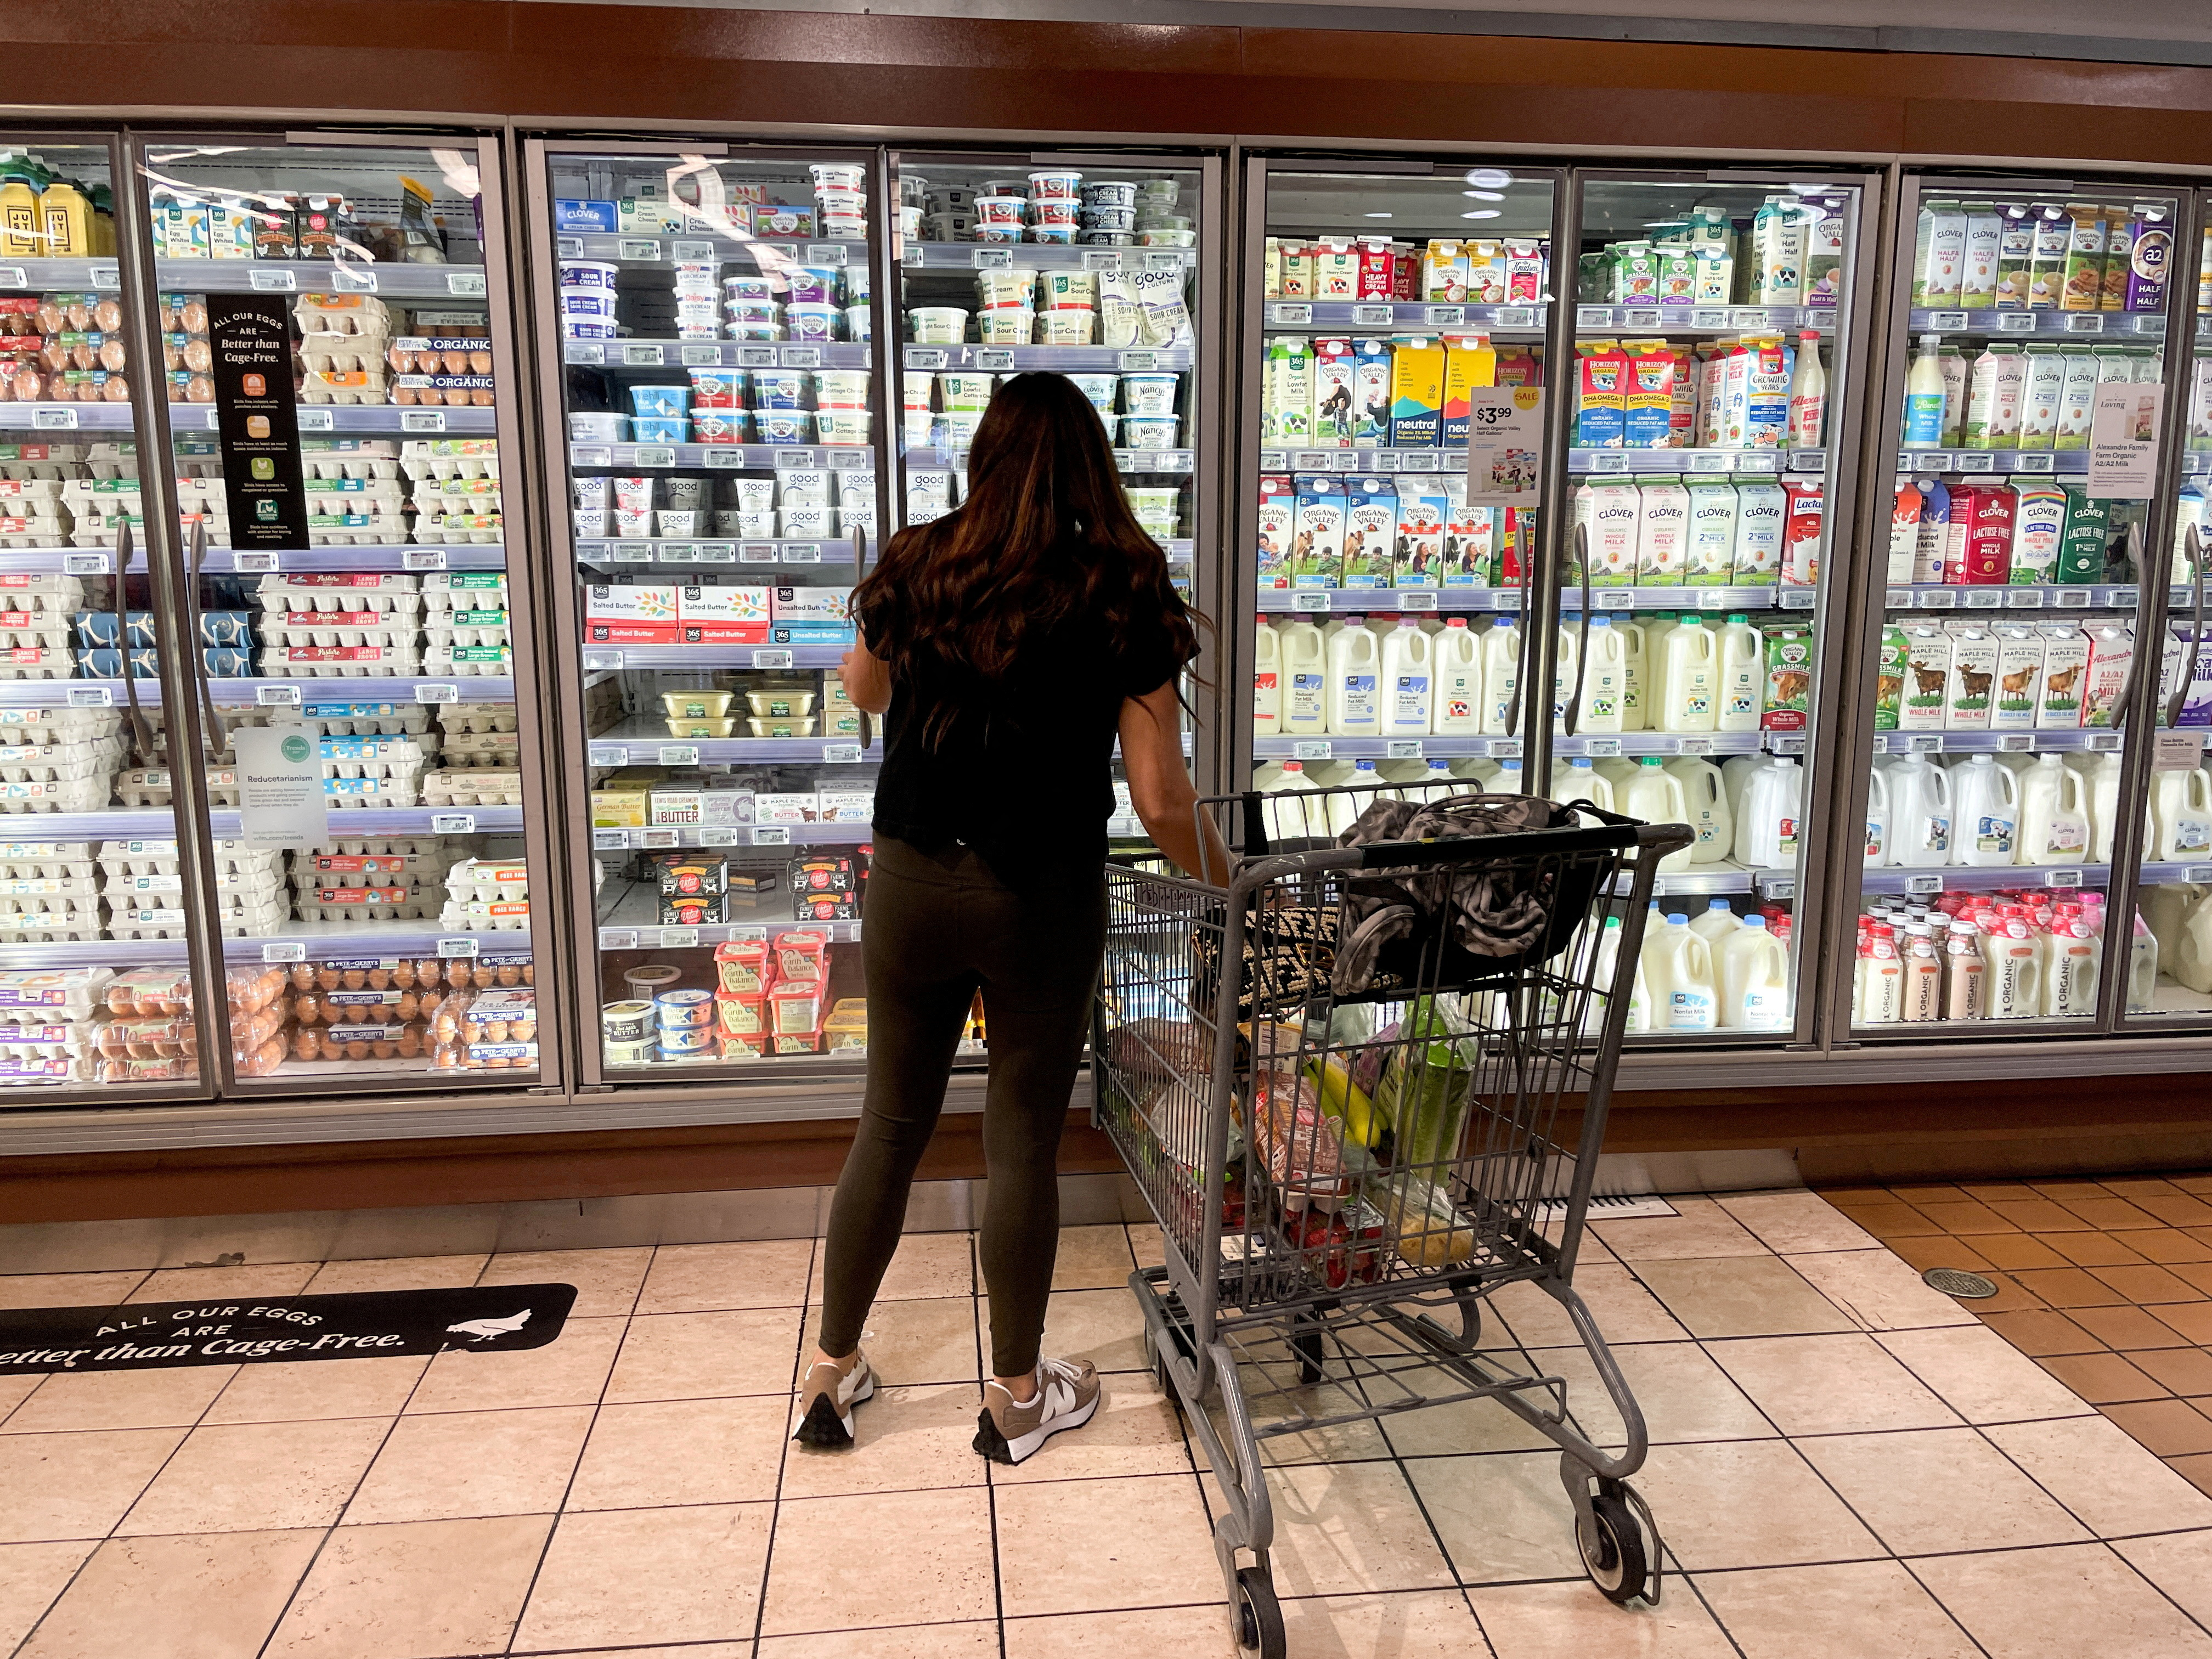 A woman shops in a supermarket in Los Angeles